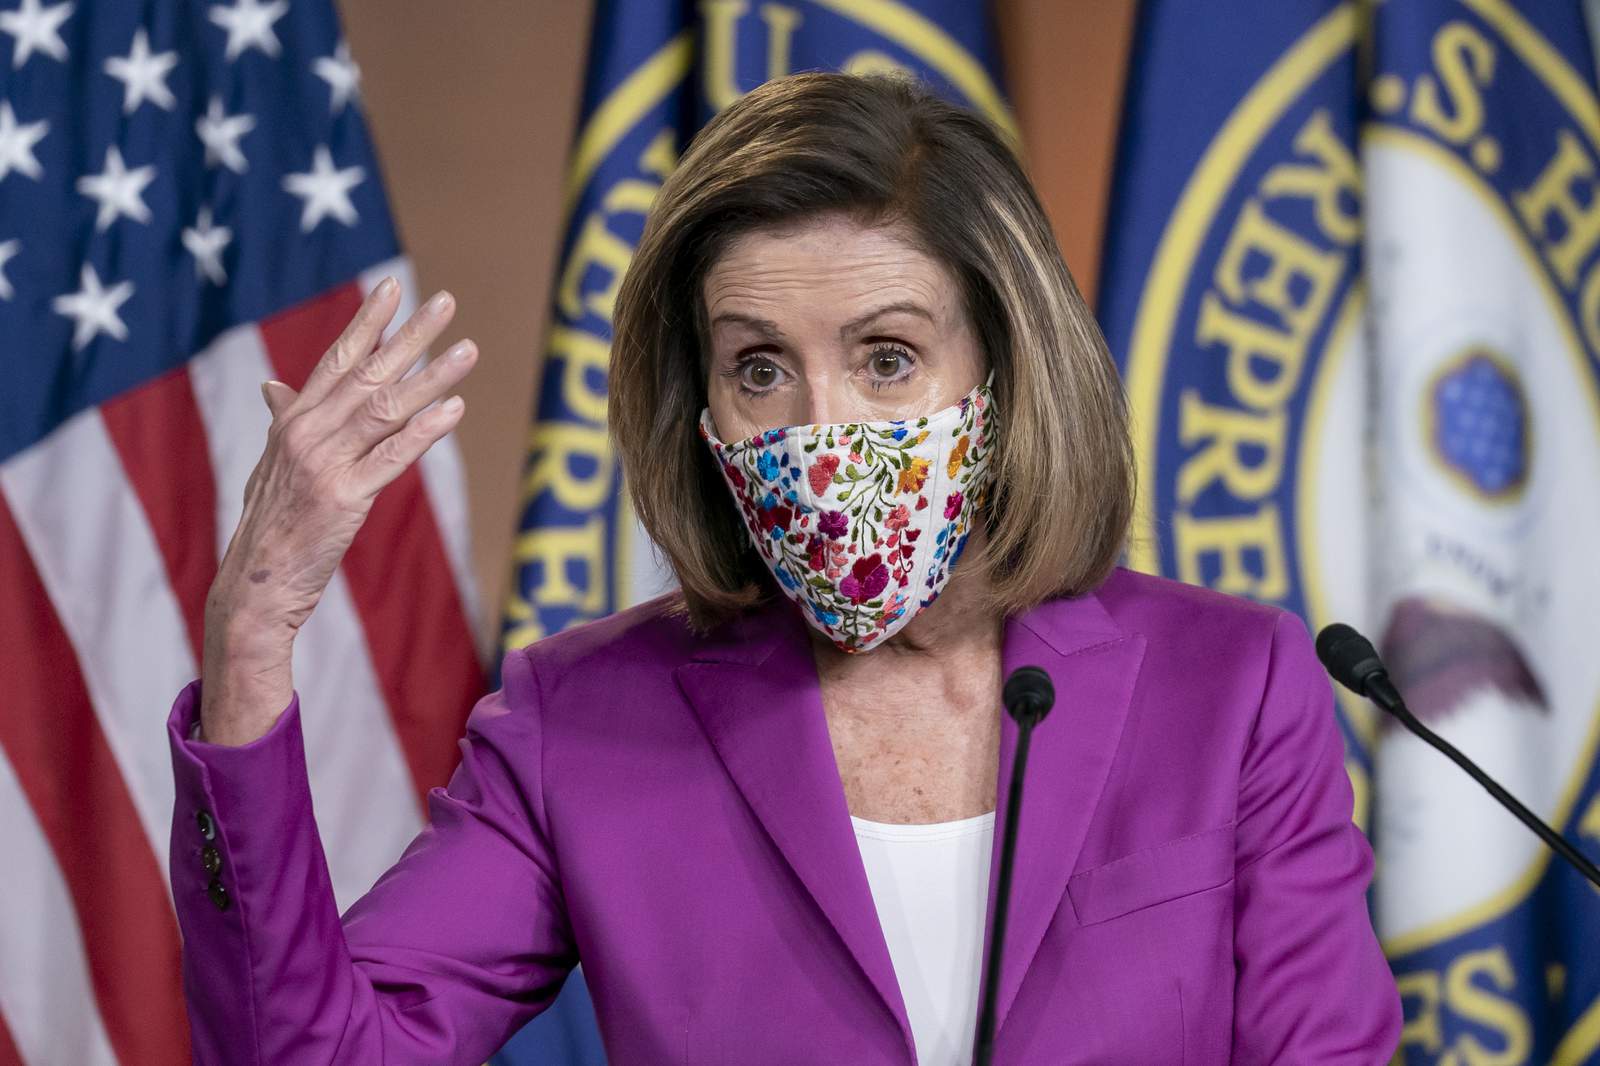 The Latest: Pelosi ties rioters' actions to 'whiteness'